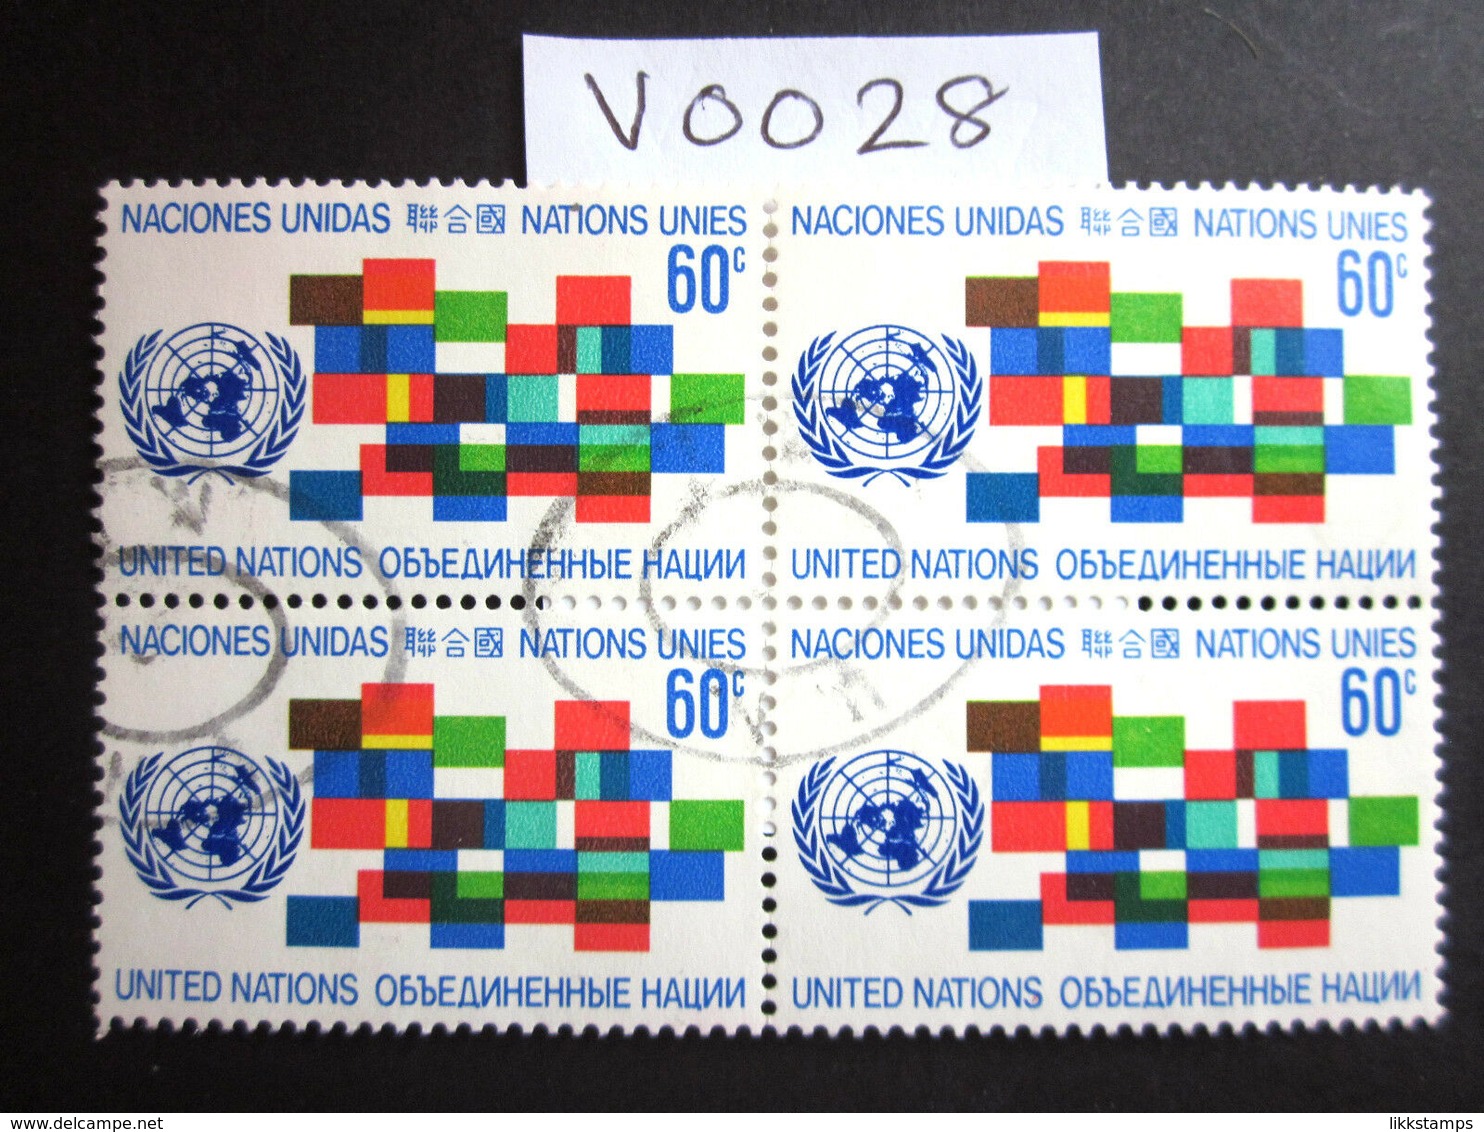 1971 A FINE USED BLOCK OF 4 "SG 223" PICTORIAL UNITED NATIONS USED STAMPS ( V0028 ) #00356 - Lots & Serien